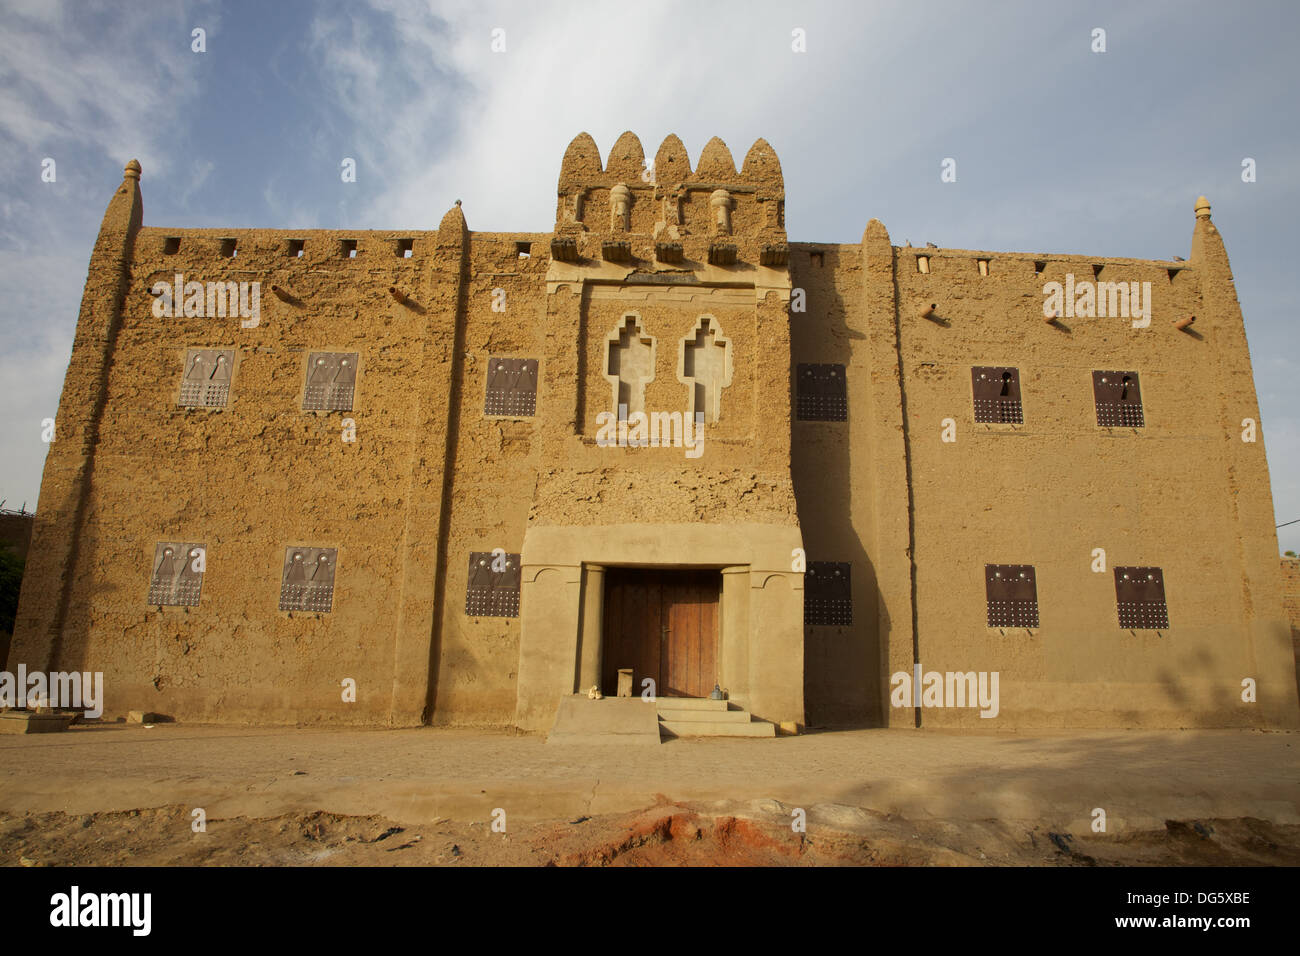 Public building - traditional mud building in Mali. Stock Photo